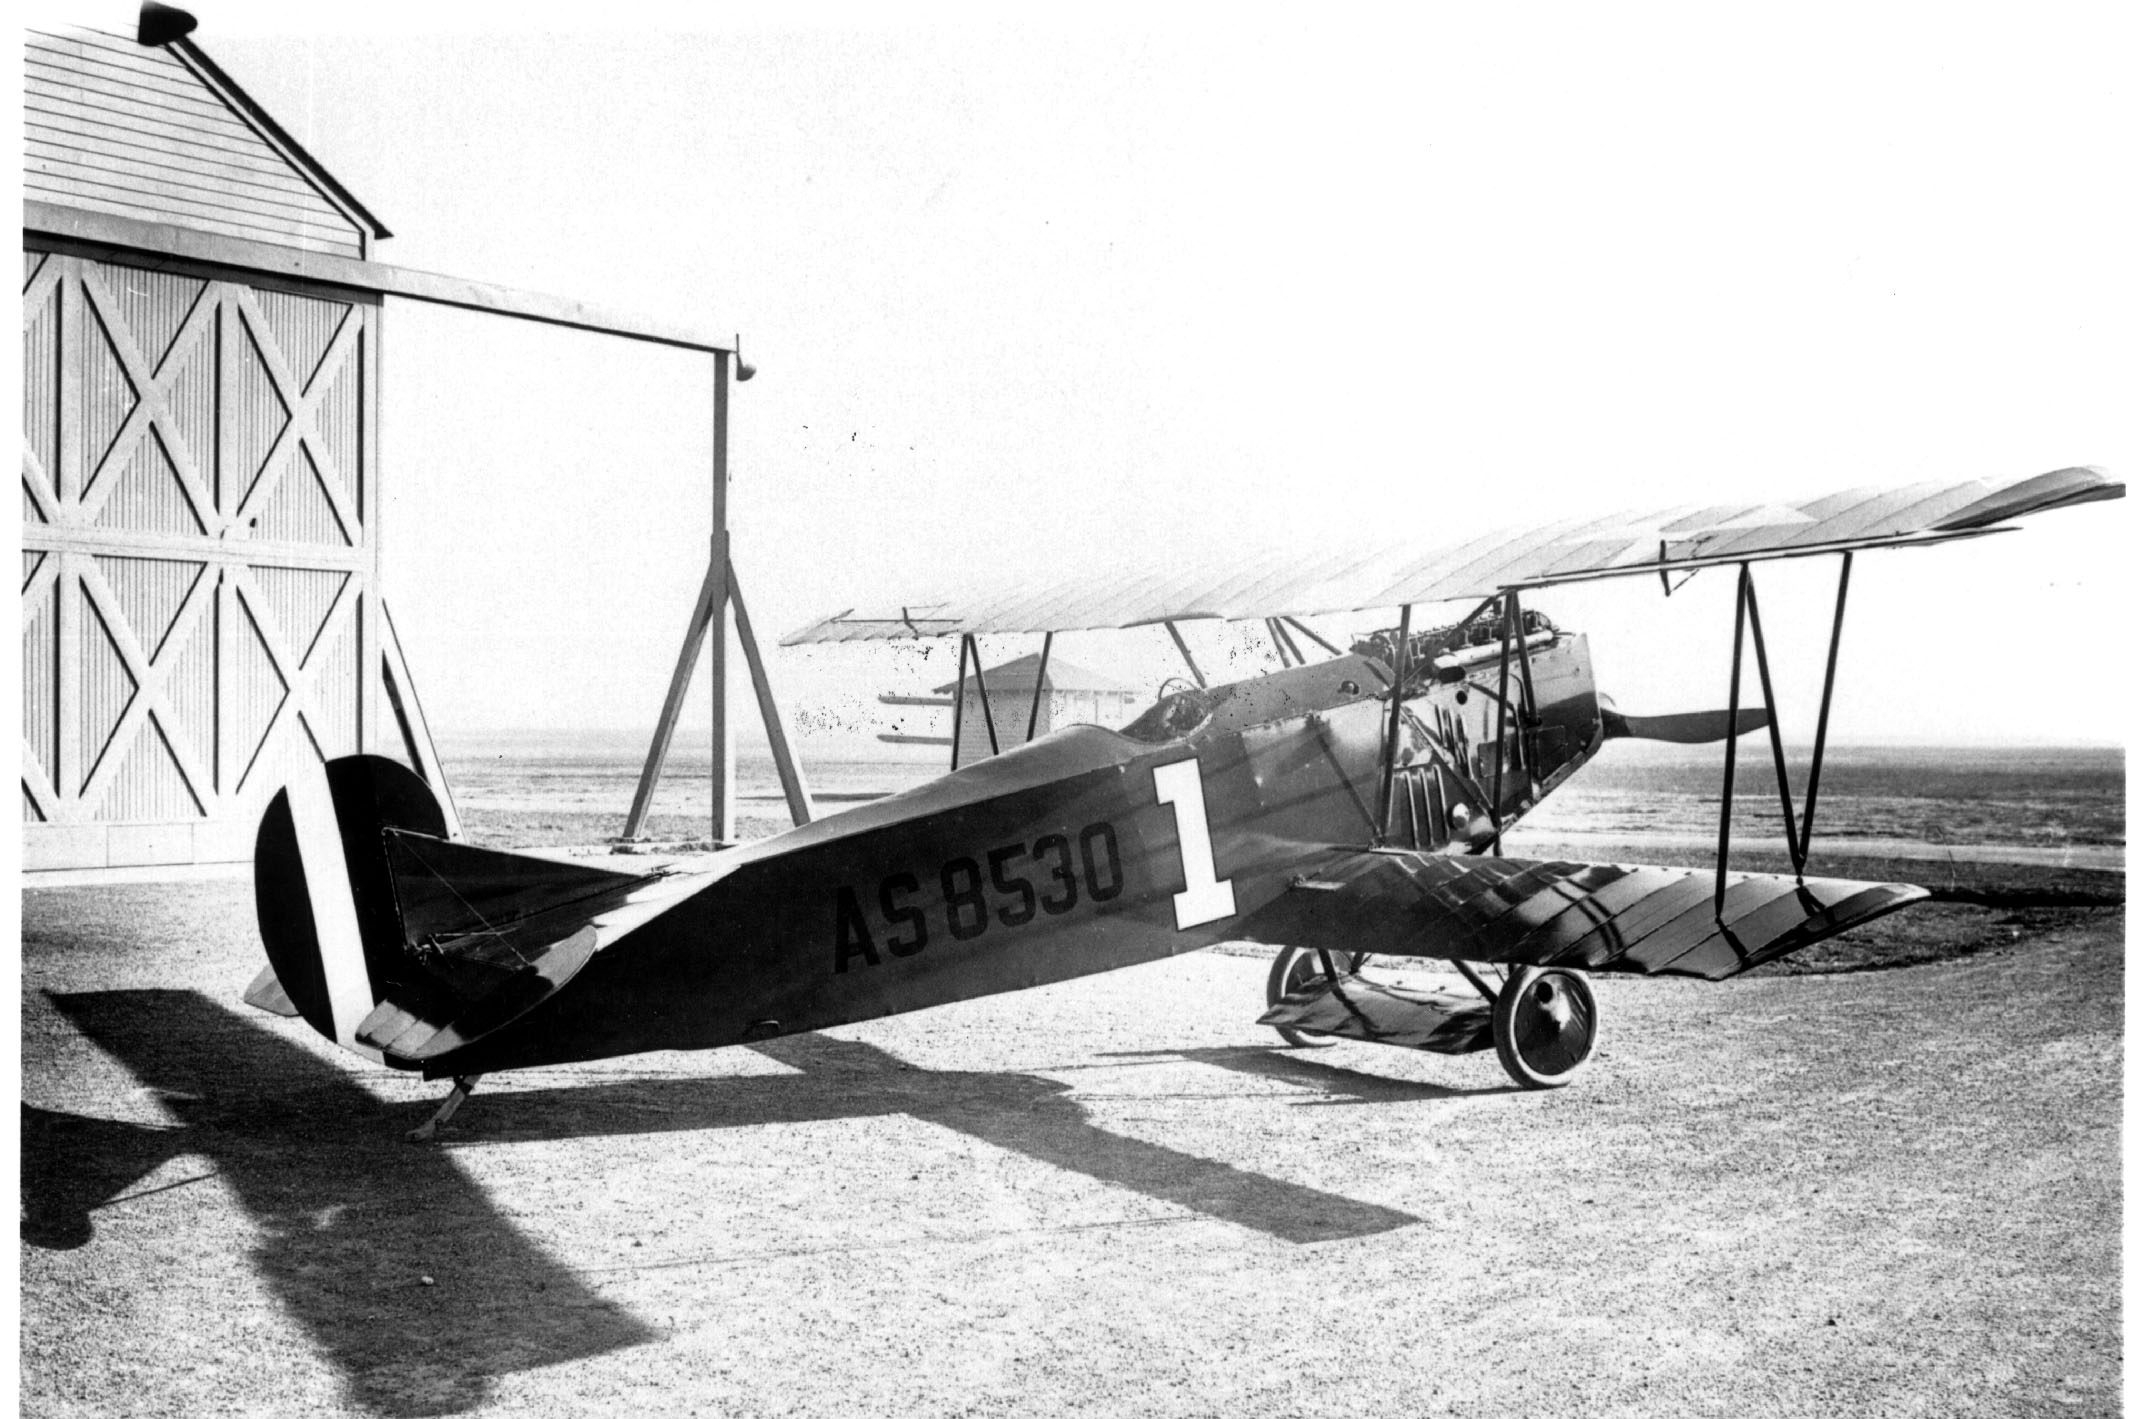 Fokker D.VII Air Service with Hall-Scott engine (Thanks to Robert Neal)